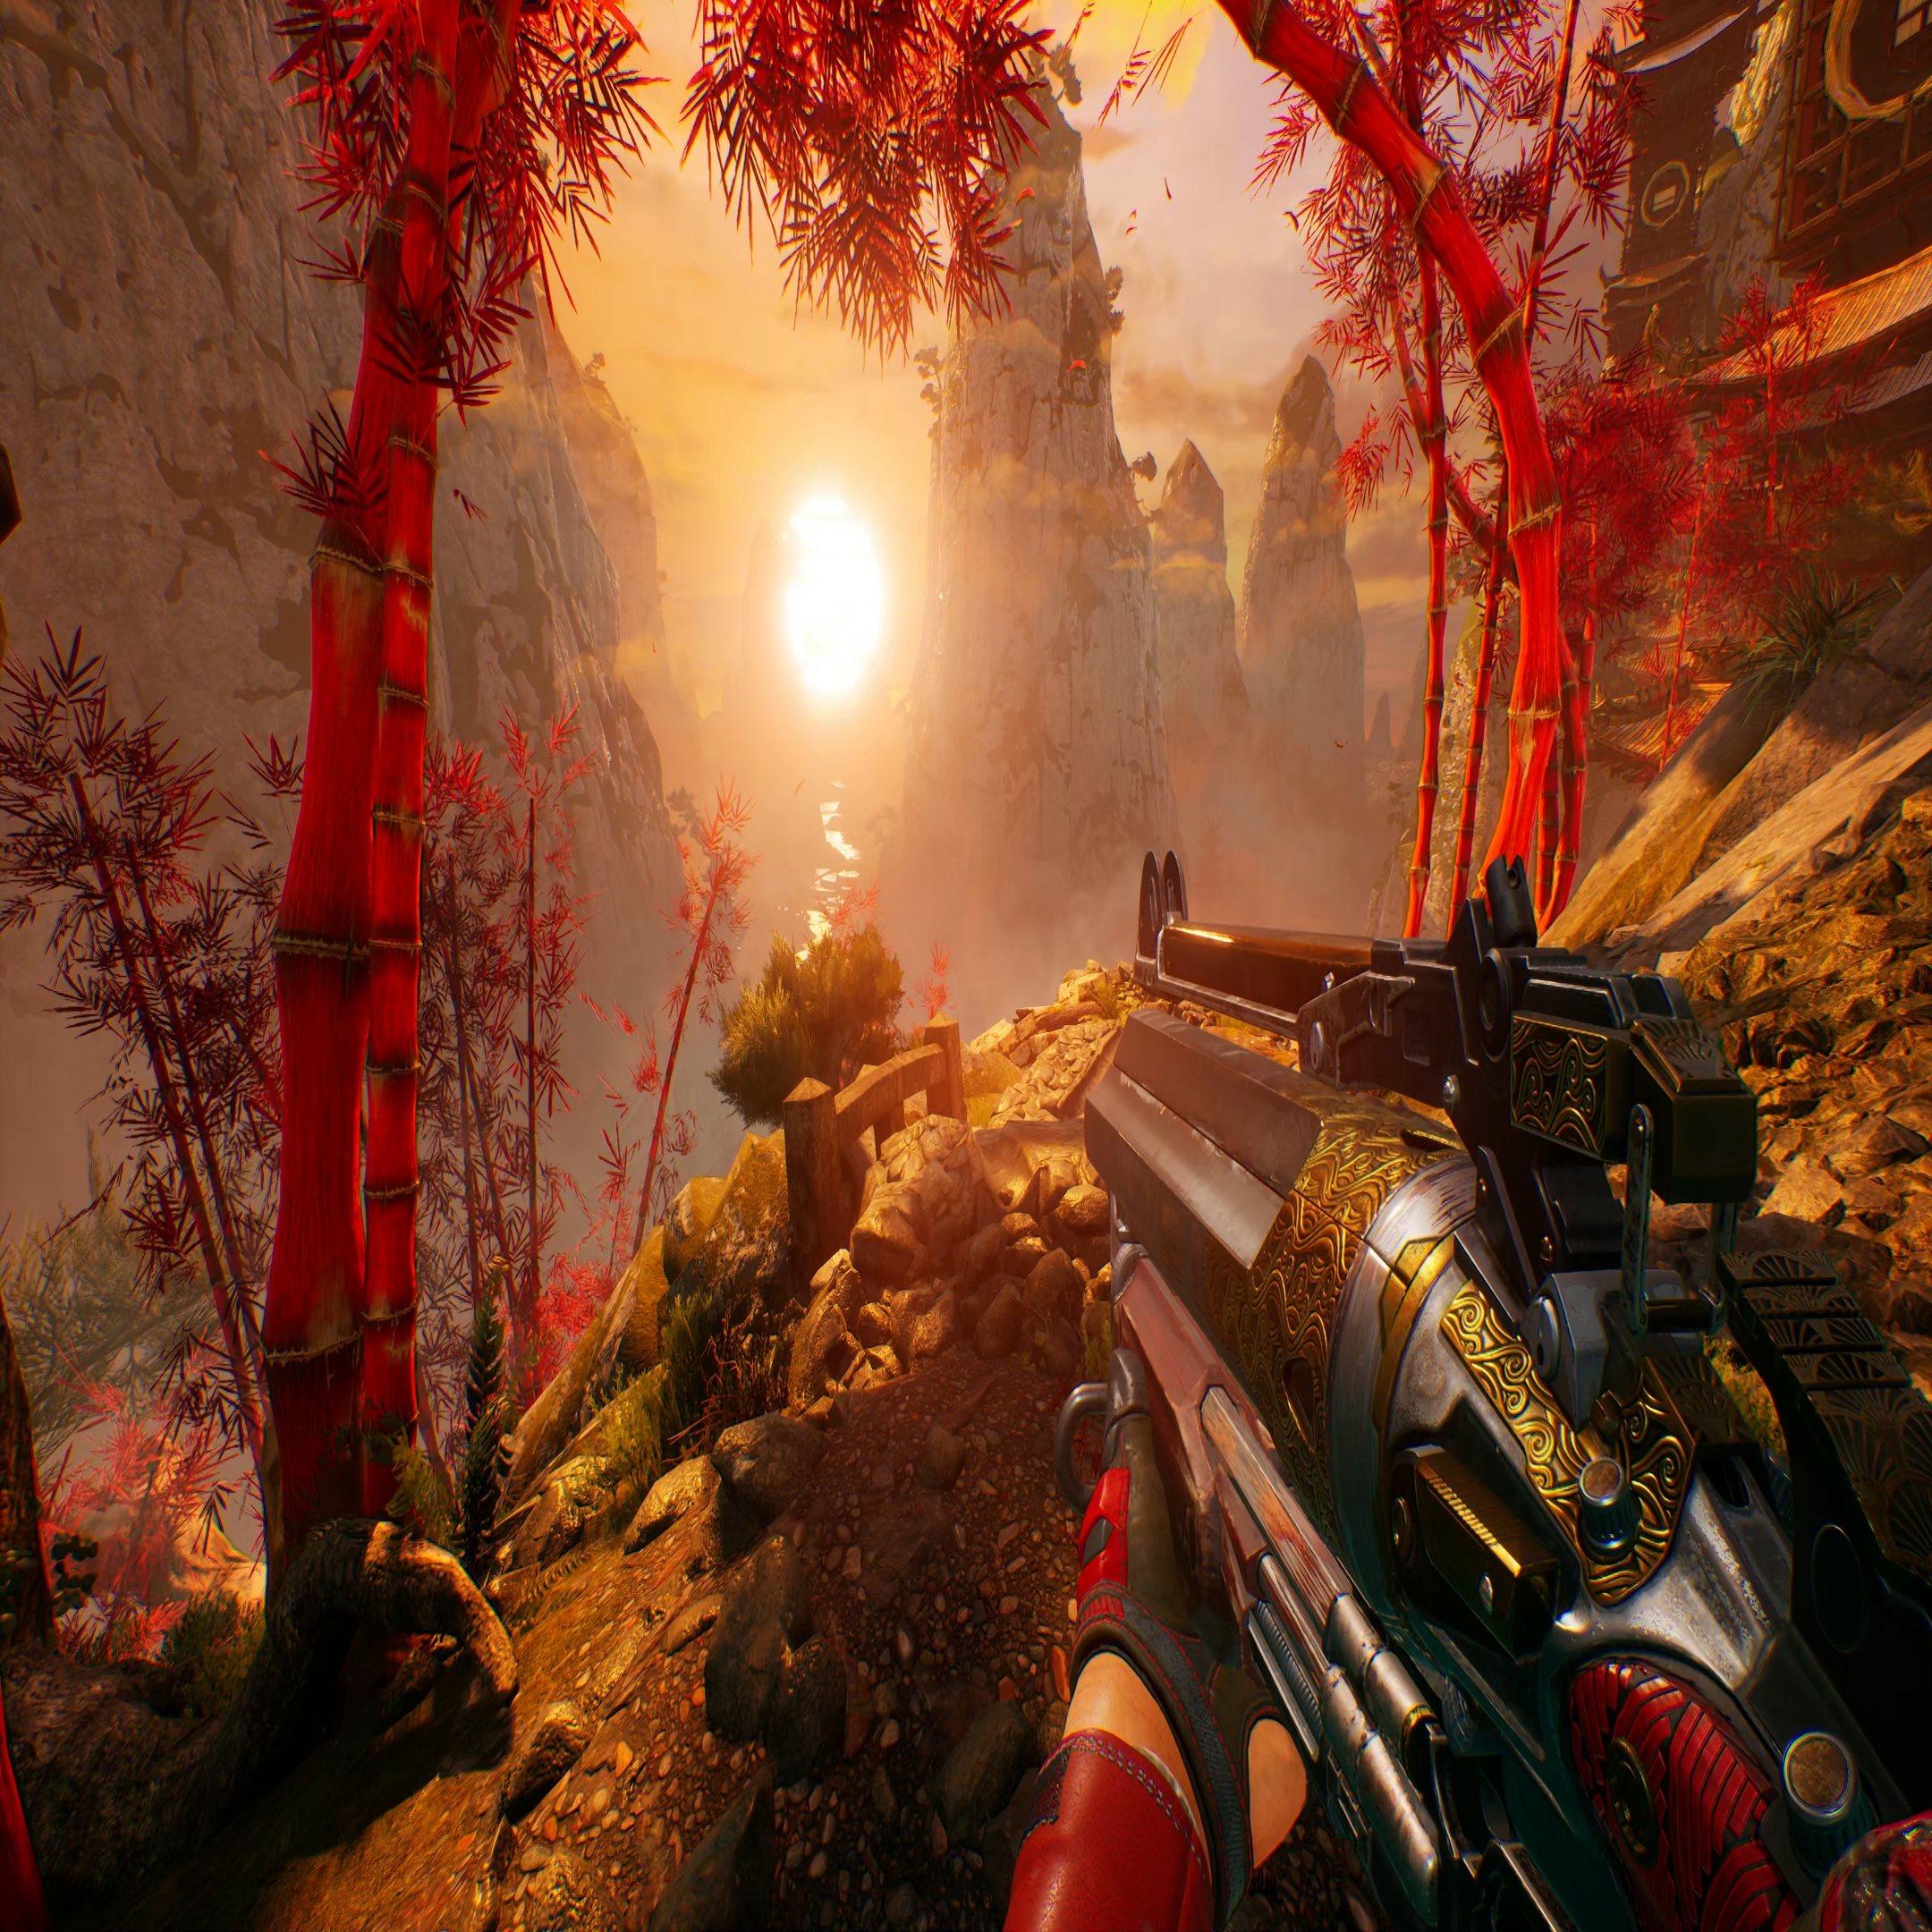 Shadow Warrior 3 Review (PC, PS4, Xbox): Is It Worth Playing